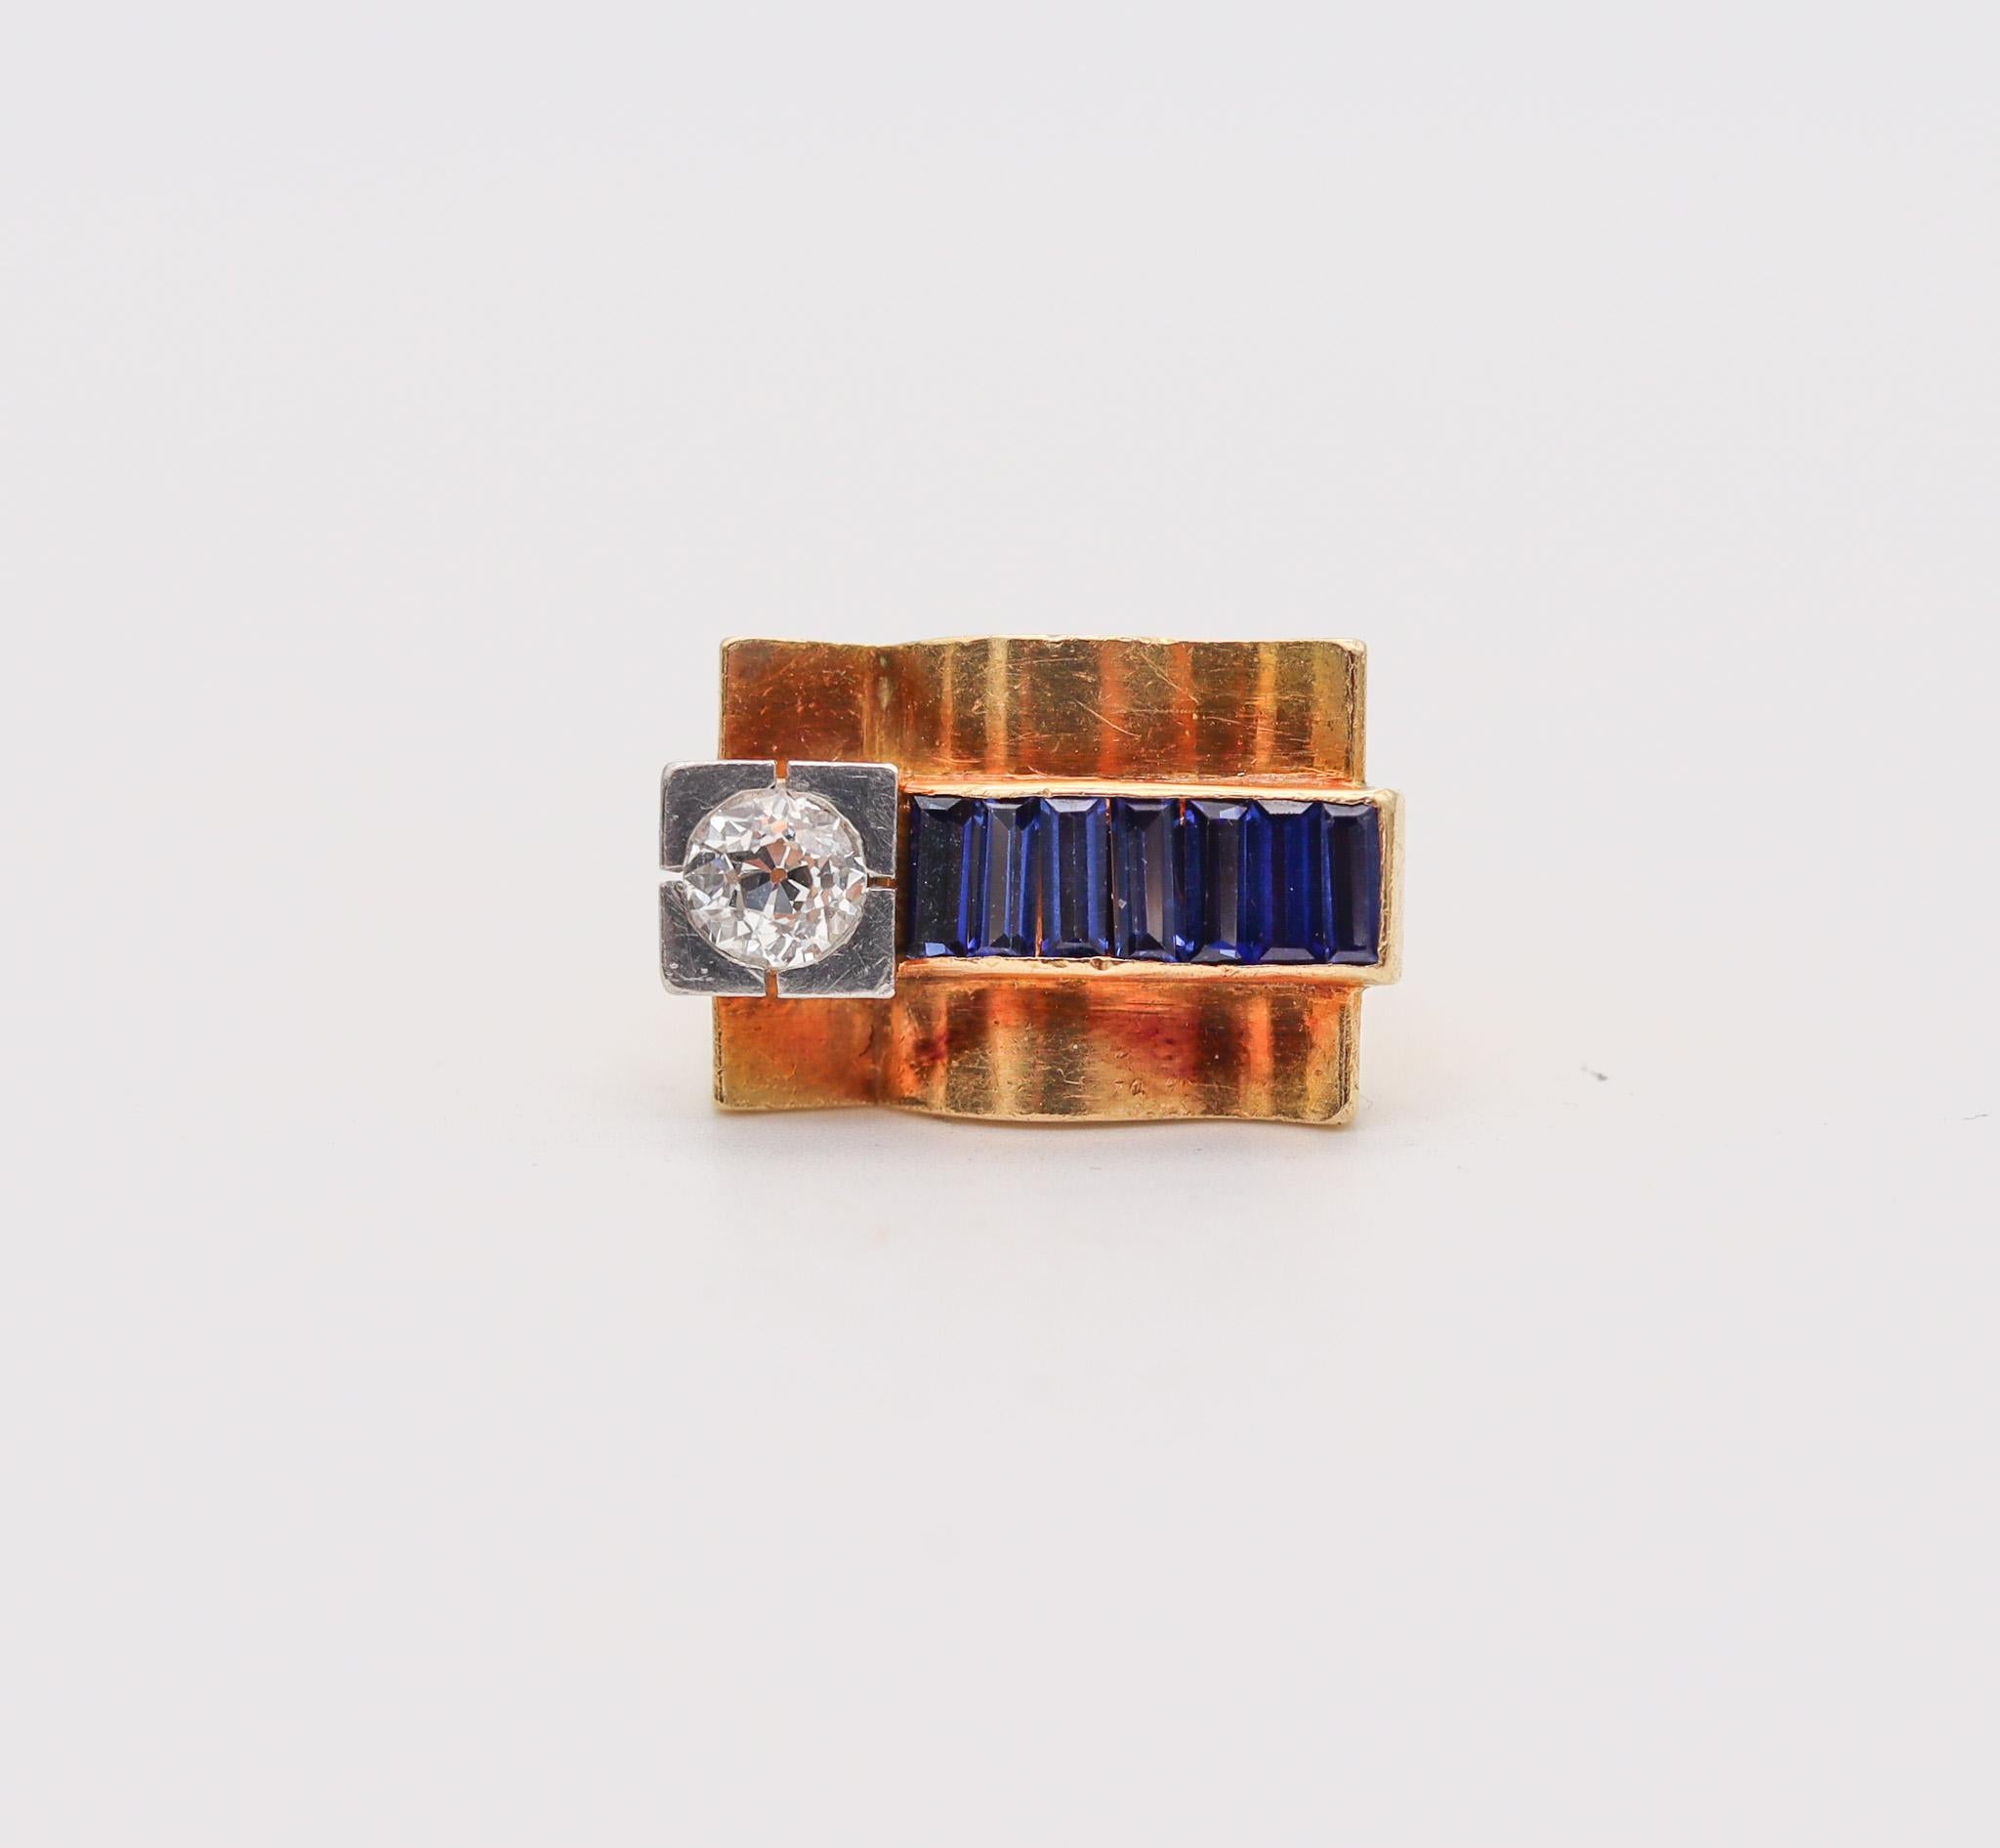 A chevalier geometric ring from the retro-machine age period.

Great chevalier ring, created during the late art-deco and the retro periods, back in the 1935. This geometric ring has been crafted with bold volumetric patterns in solid yellow gold of